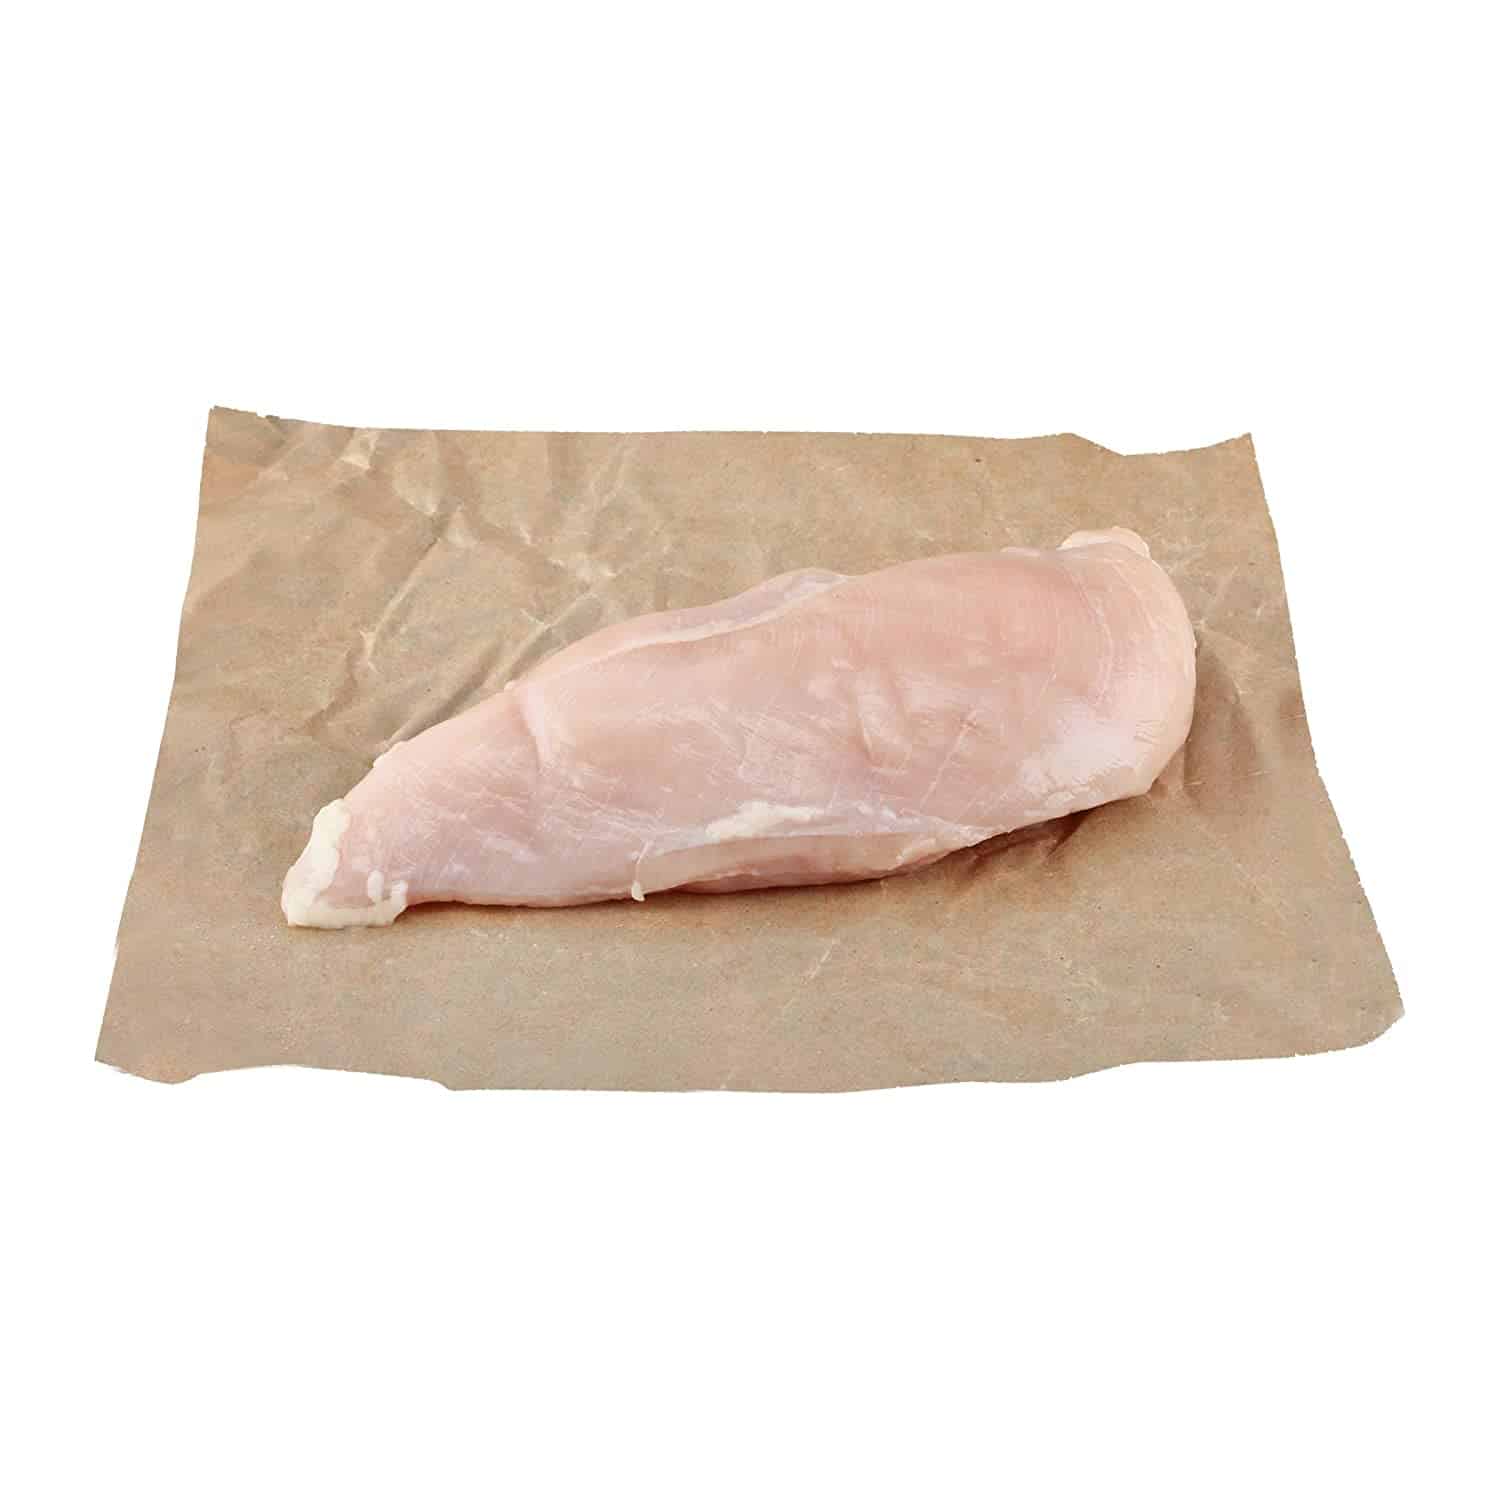 Oasis Fresh Bell & Evans, Chicken Breast Boneless Skinless Air Chilled Tray Pack Step 2 Per Lb.